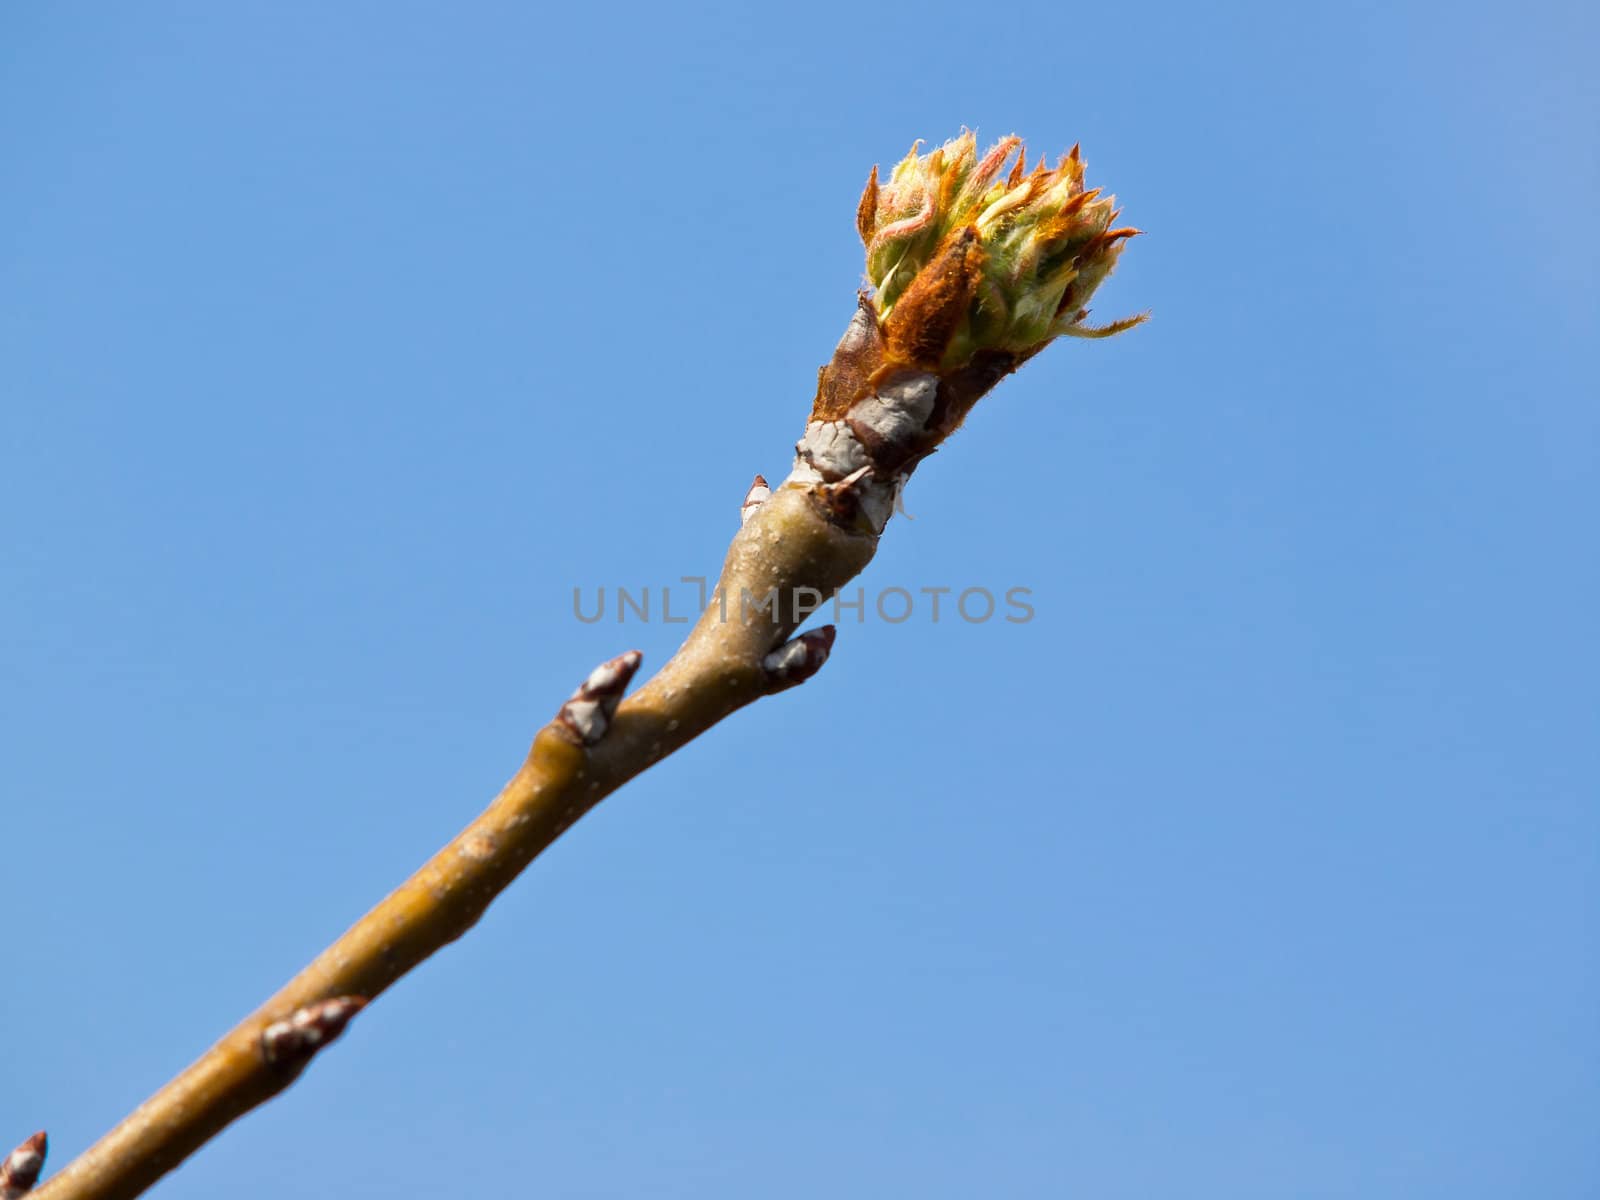 bud on a branch of pair fruit tree